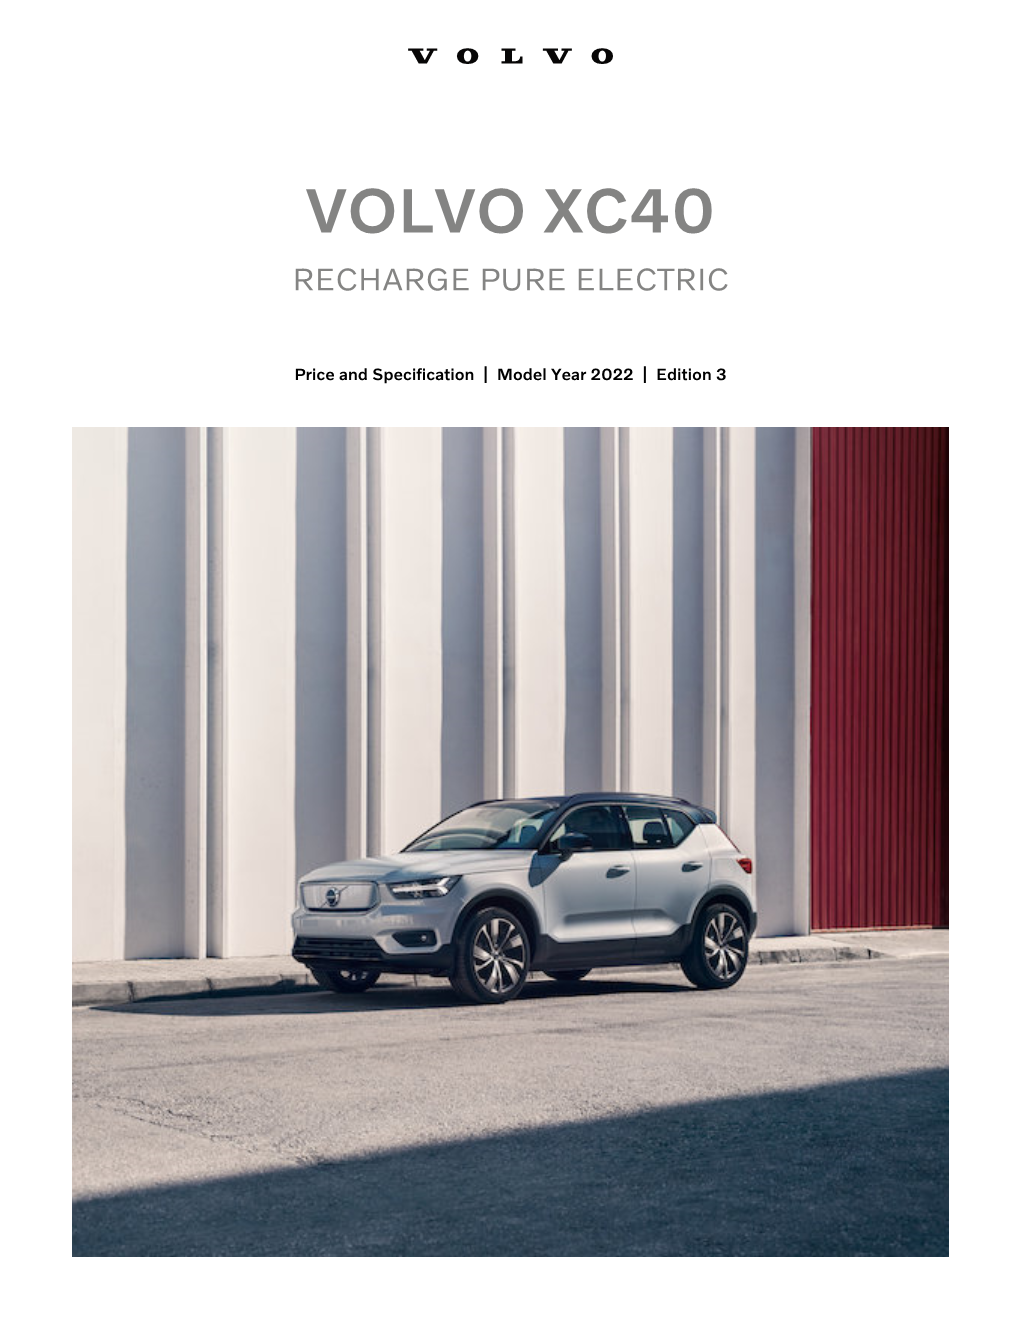 Volvo Xc40 Recharge Pure Electric